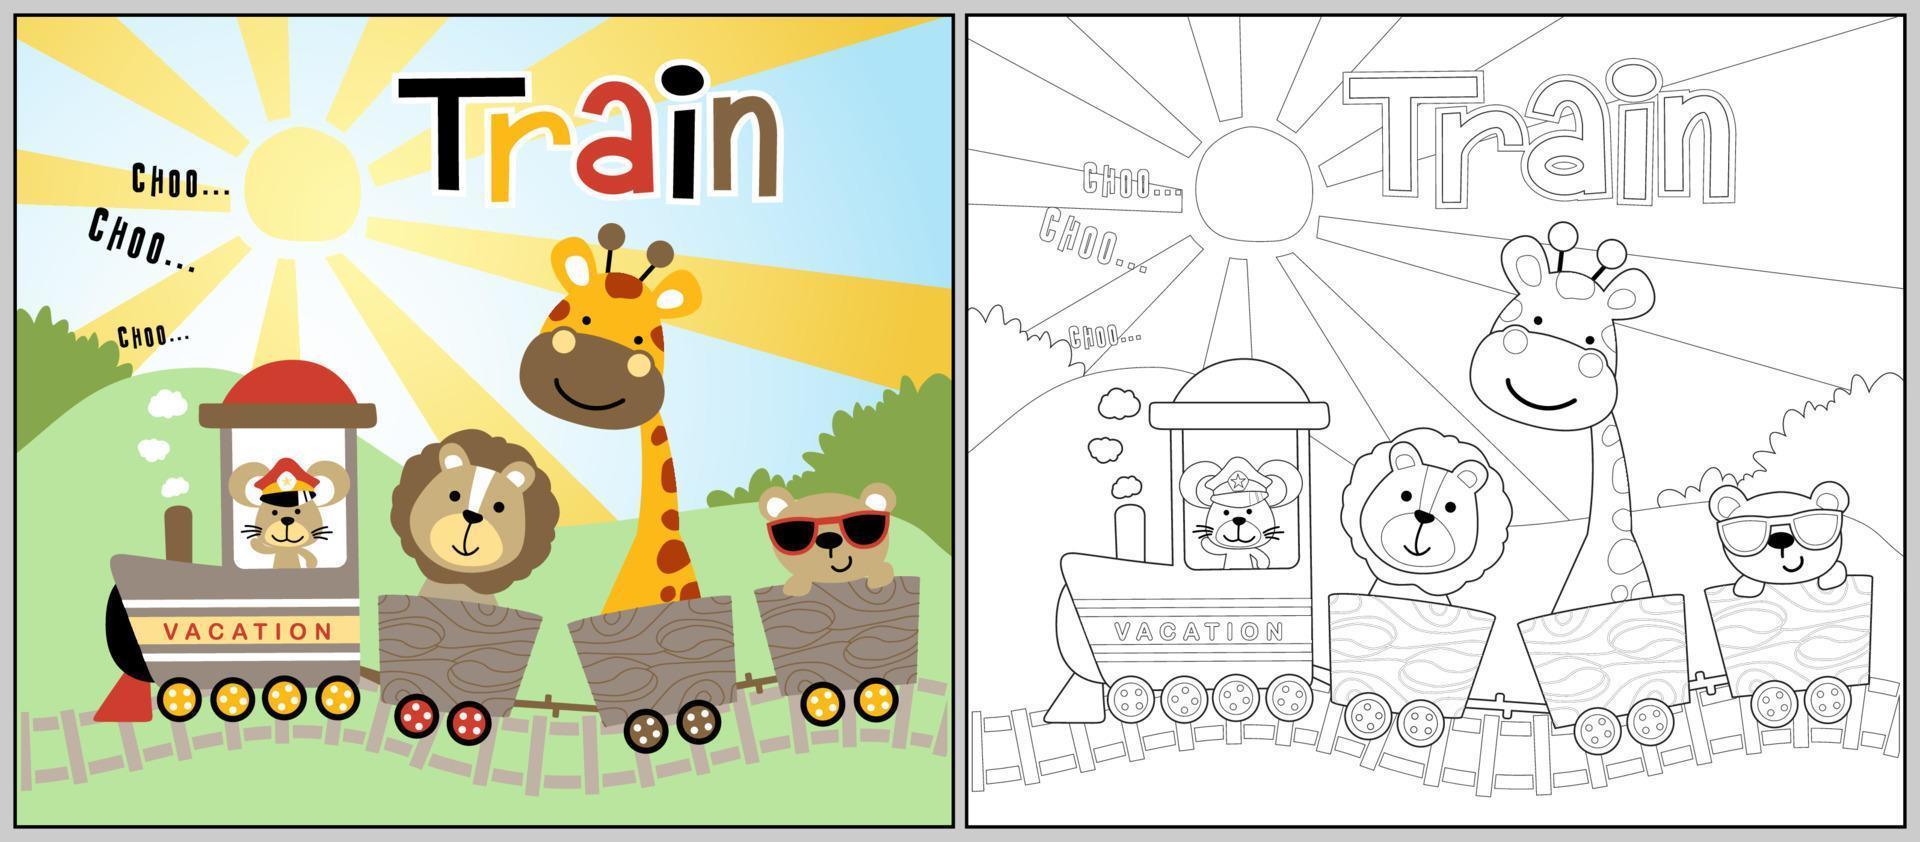 Funny animals cartoon on steam train. Coloring book or page vector